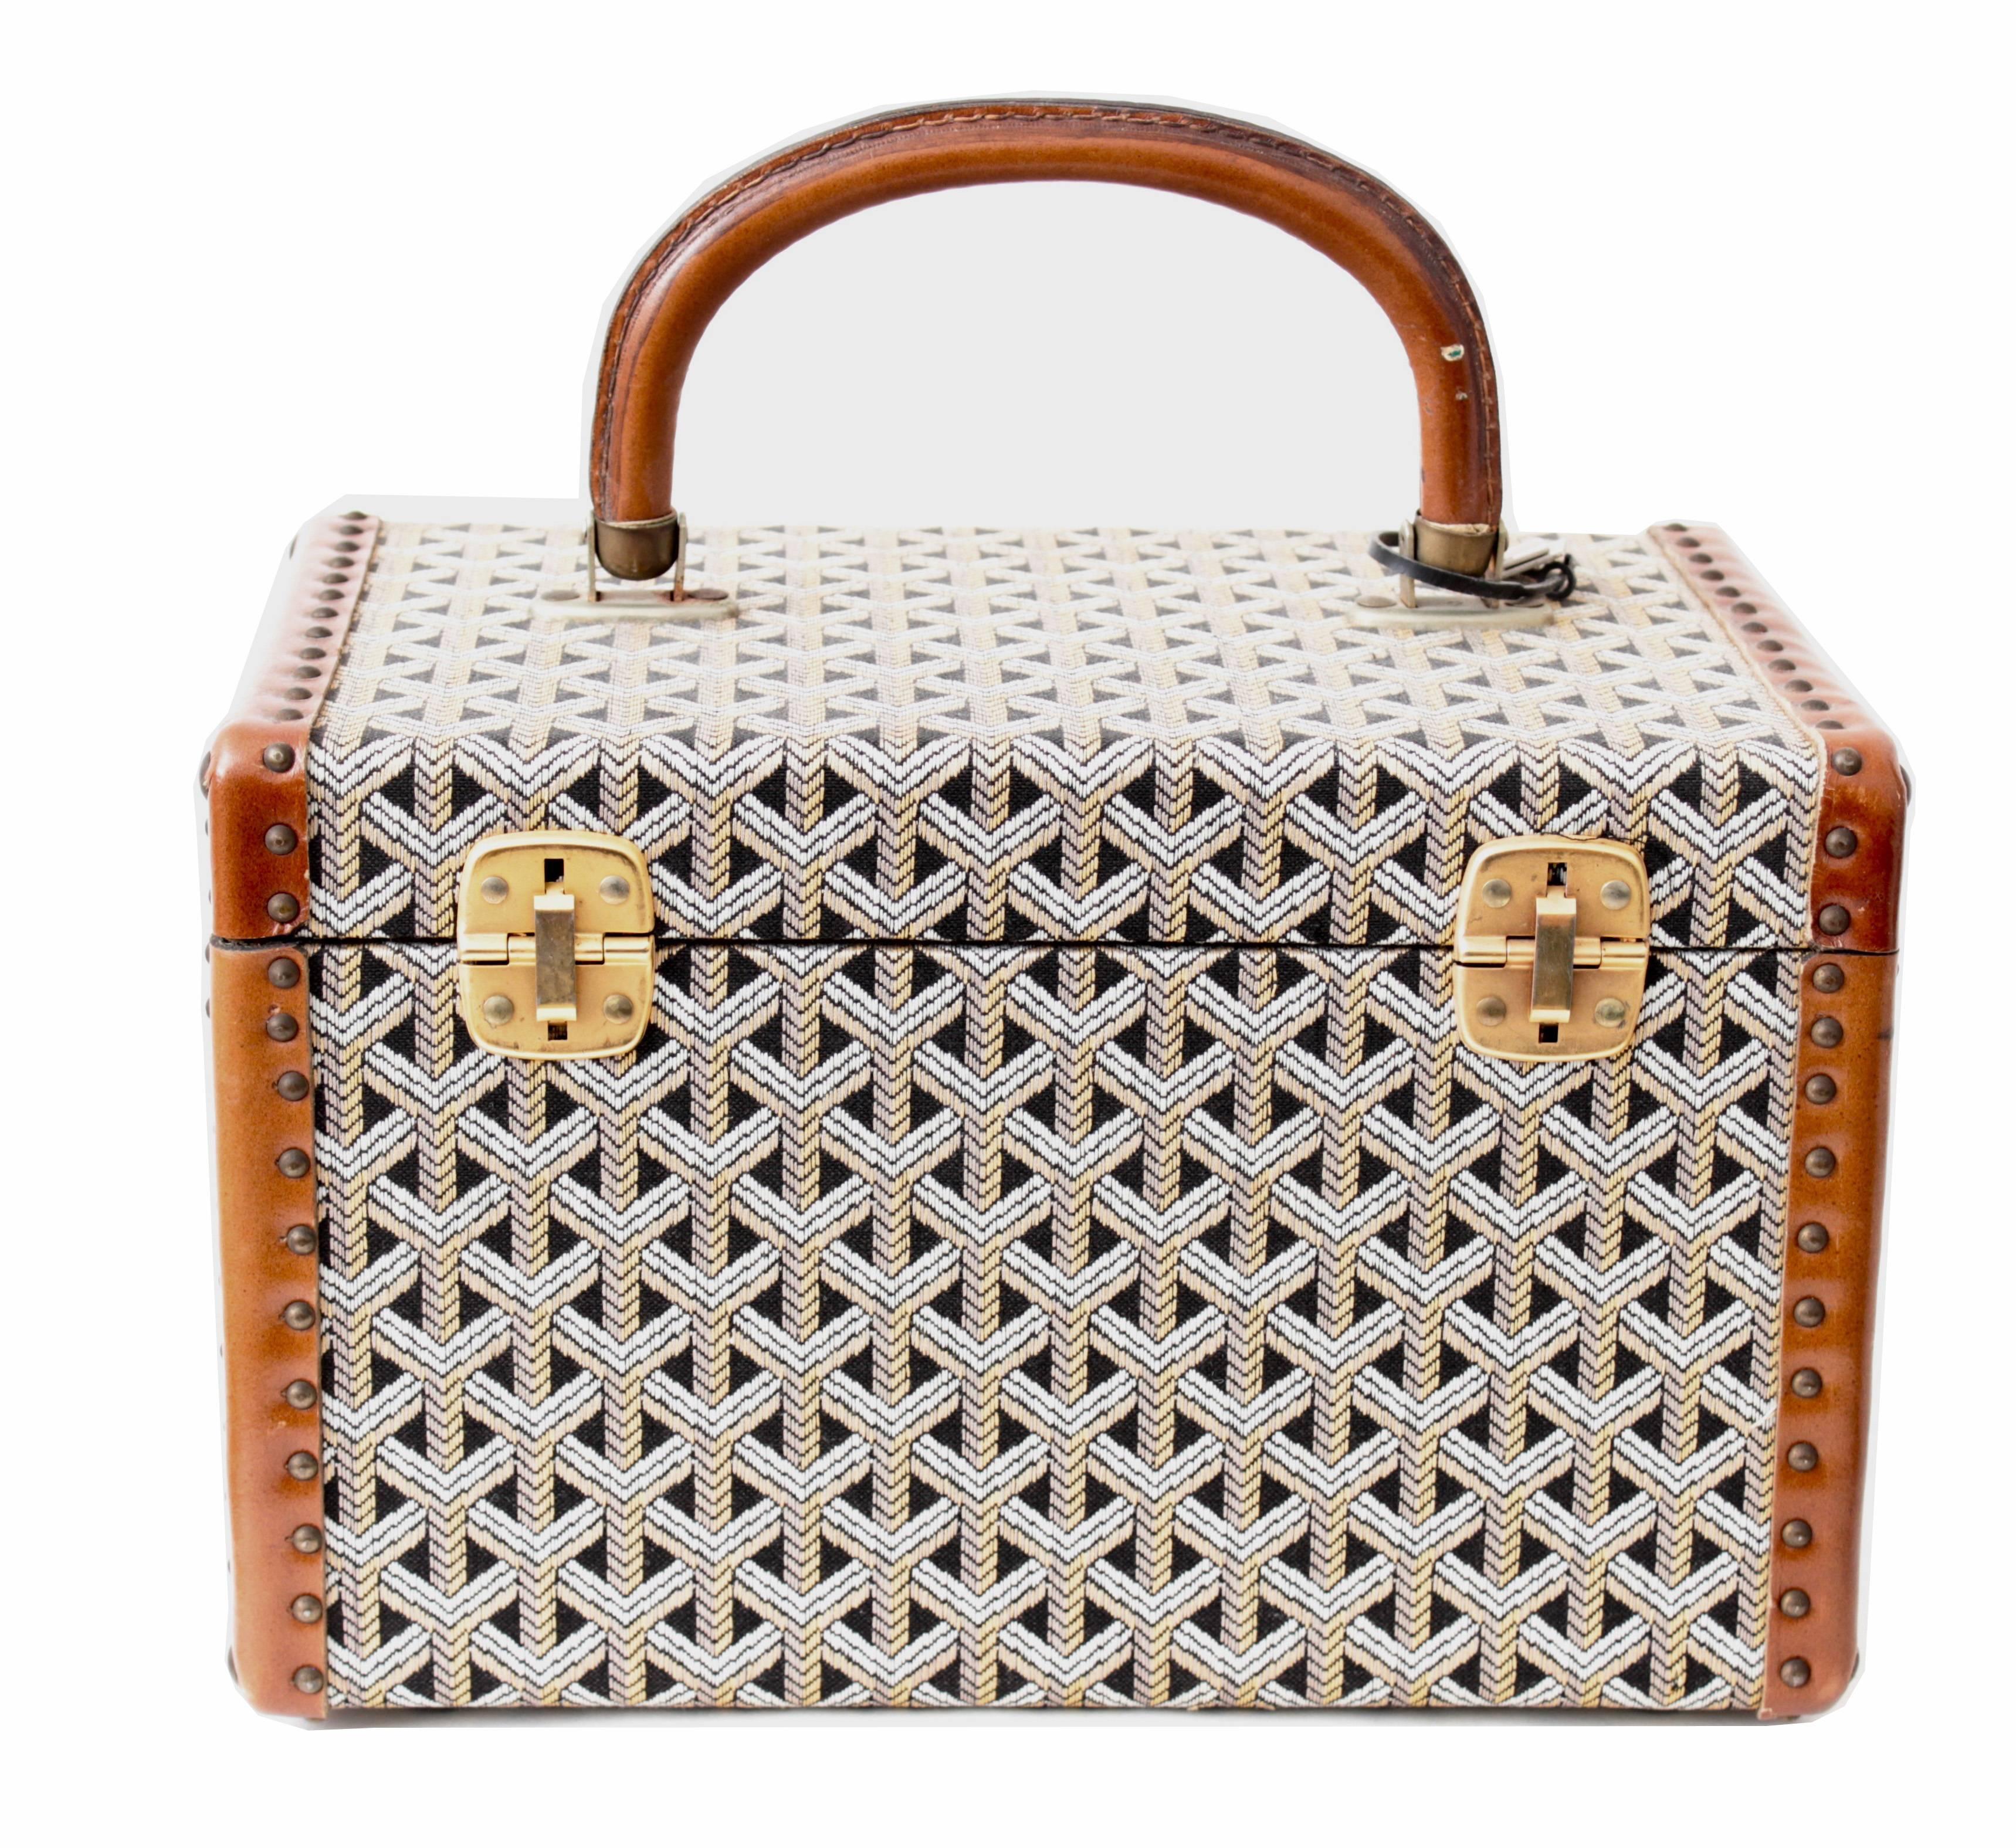 Travel in style with this extremely rare vintage vanity case or mini trunk made by Goyard, most likely made in the 1960s.  Made from their signature Goyardine fabric, it's fully-lined in silk fabric and features an open elasticized pocket, a